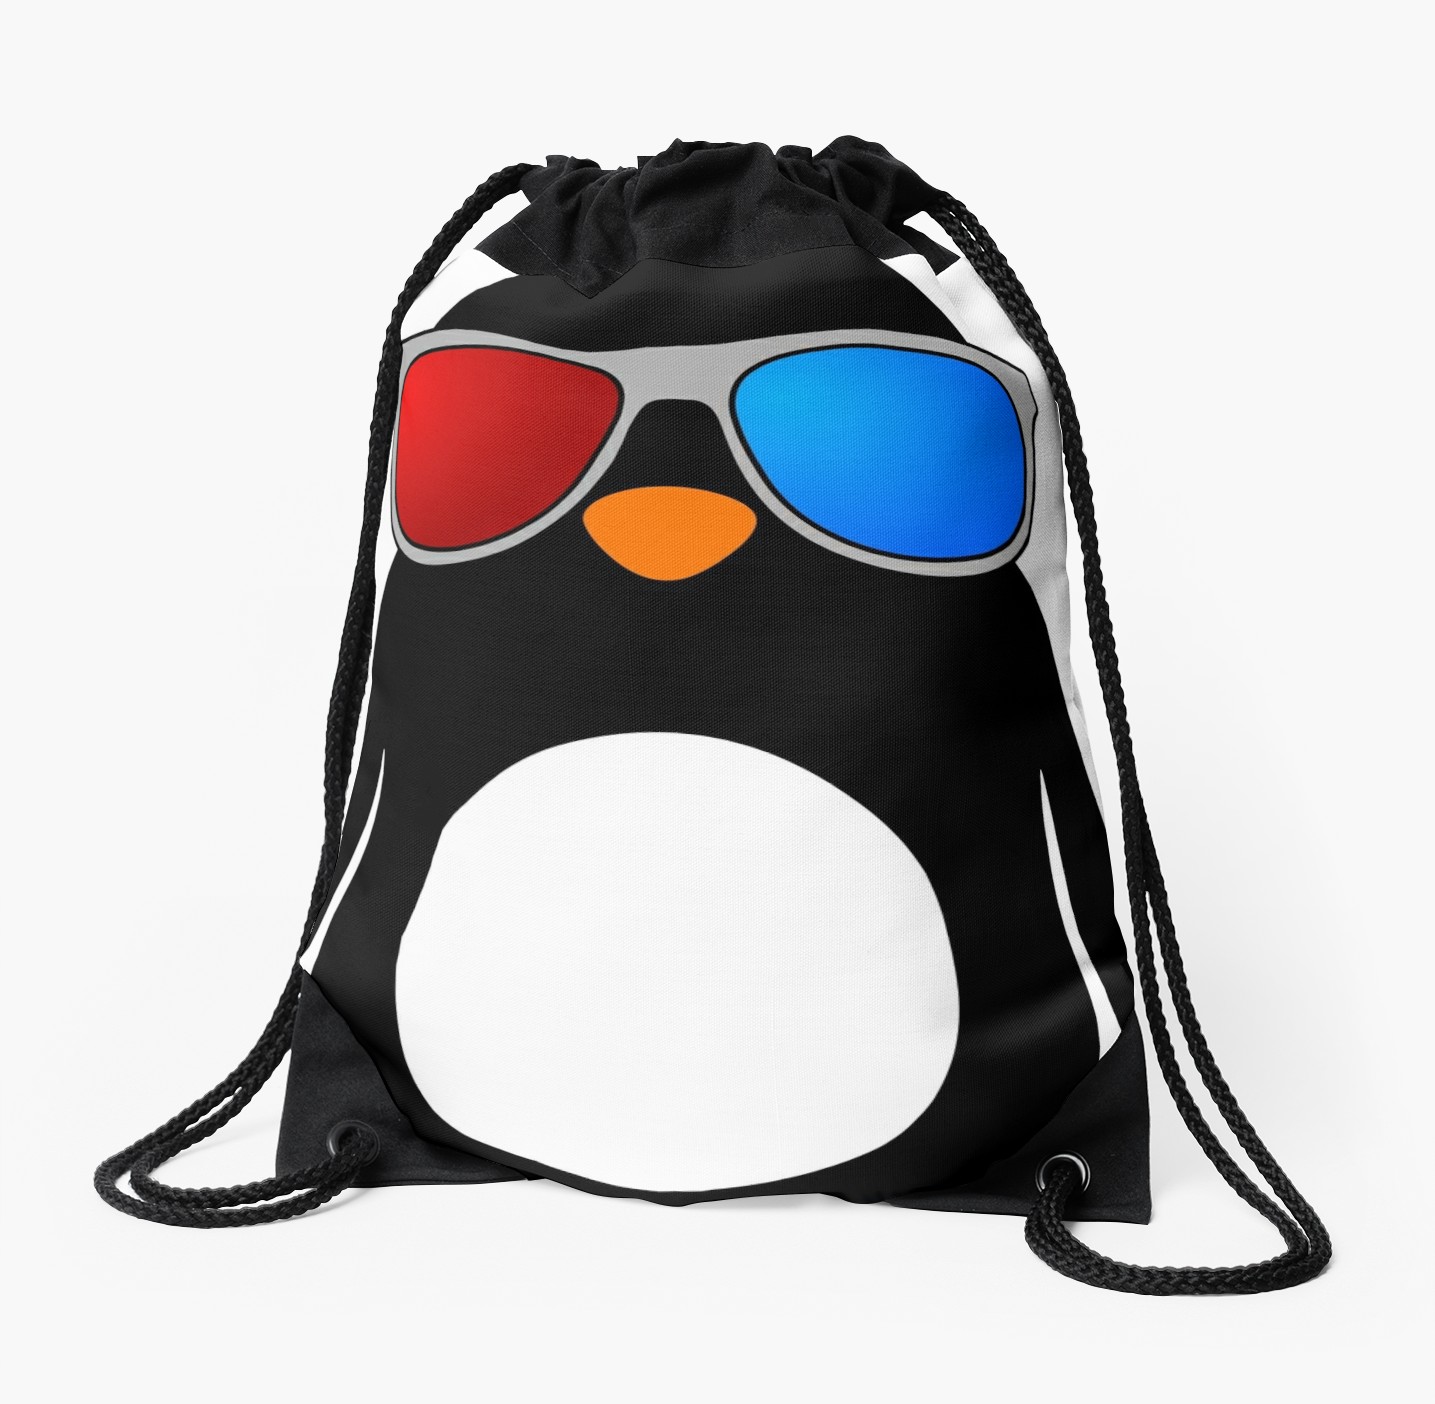 Swaggy Penguin